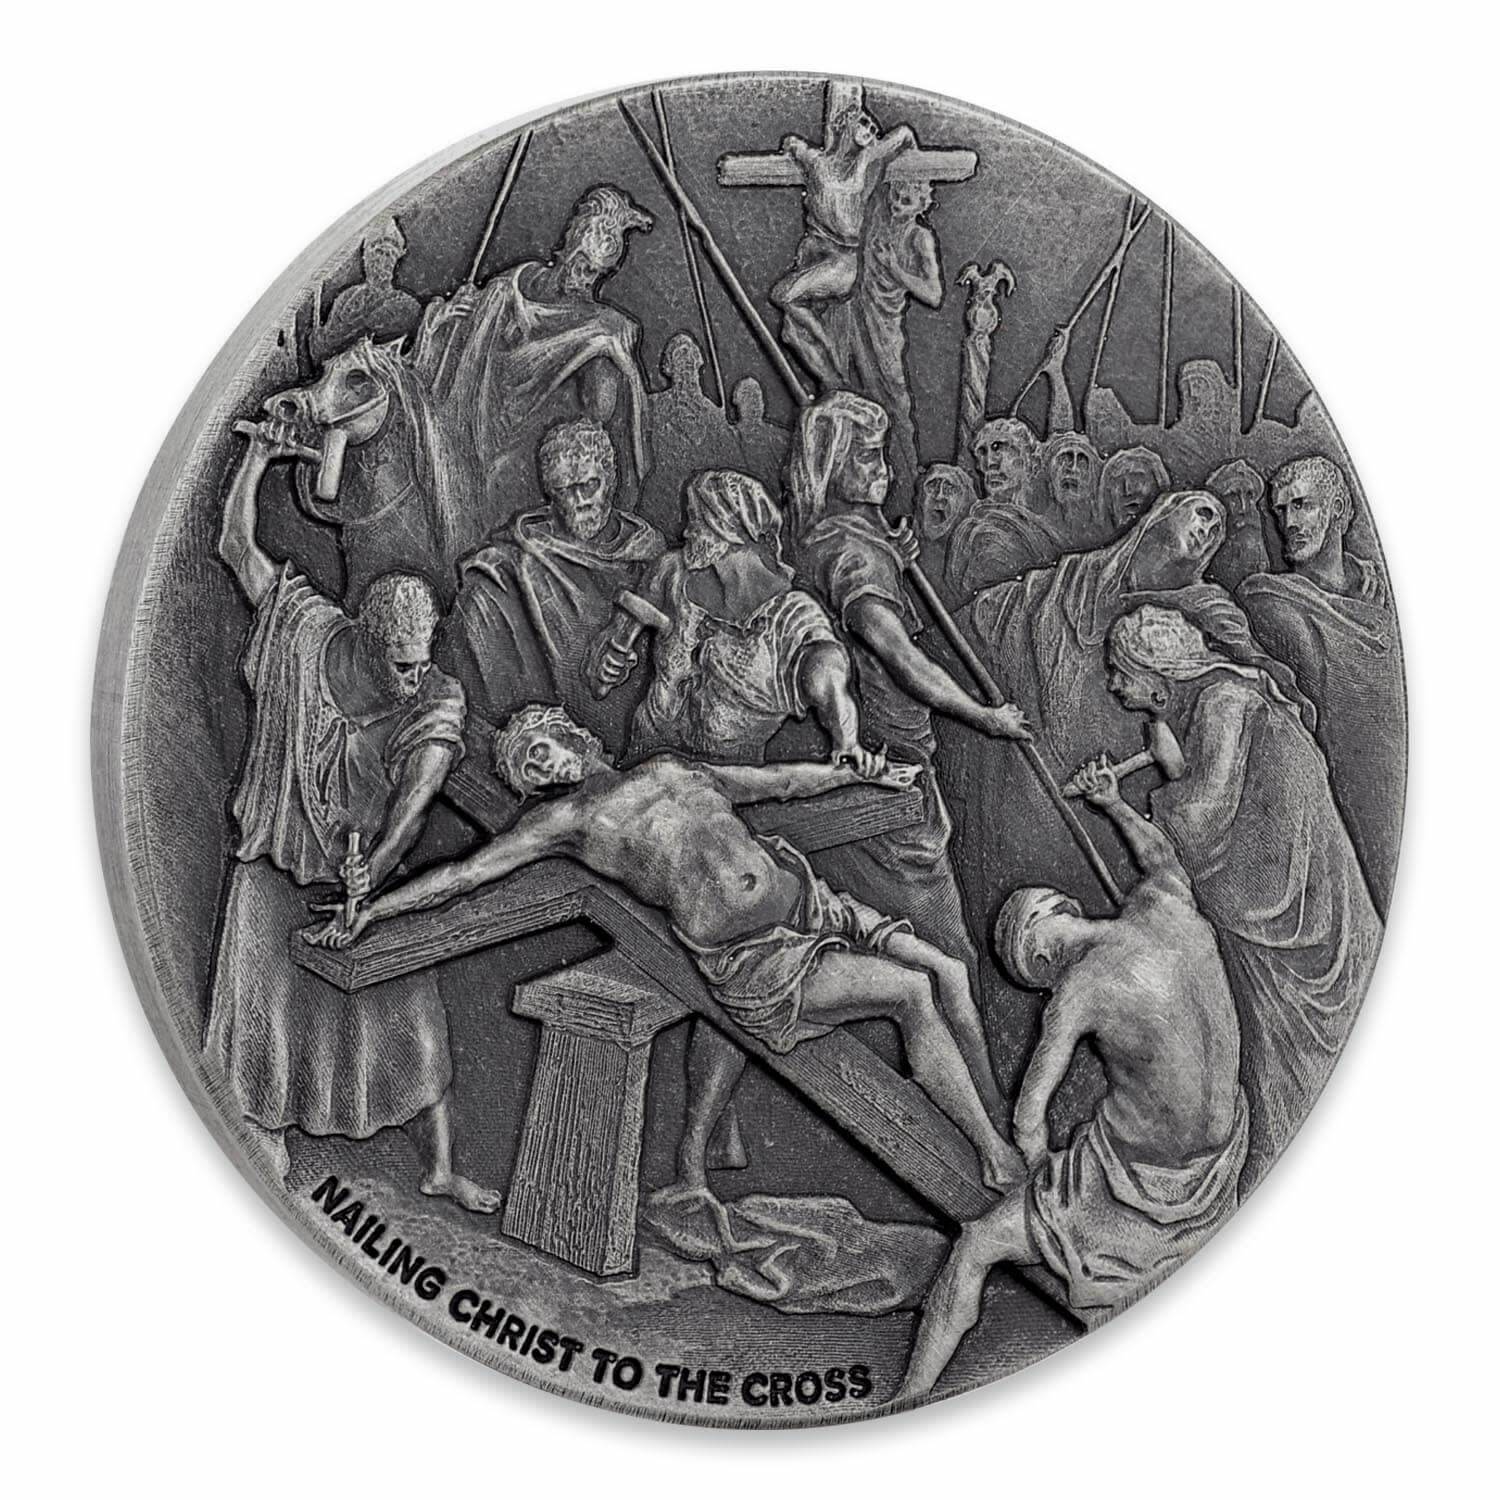 SCOTTSDALE MINT SCOTTSDALE MINT BIBLICAL SERIES COIN, NAILING CHRIST TO THE CROSS, 2017, SILVER, 2OZ